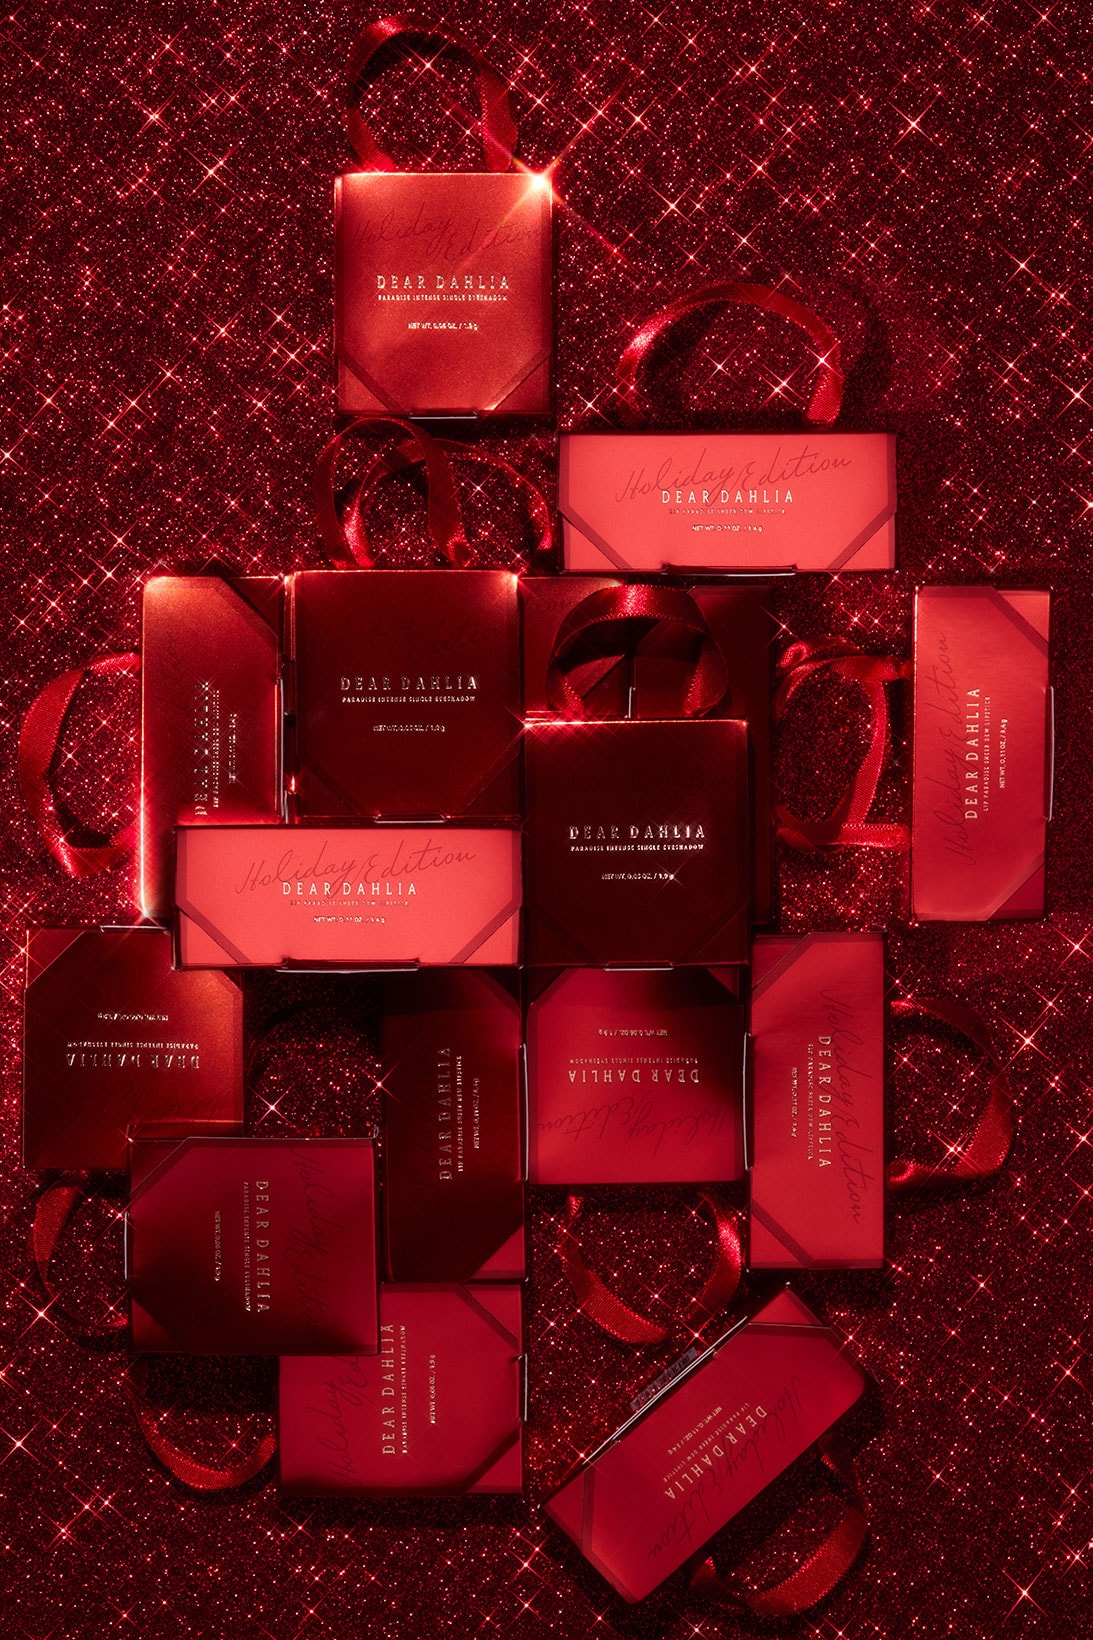 Dear Dahlia Holiday Makeup Collection Red Boxes